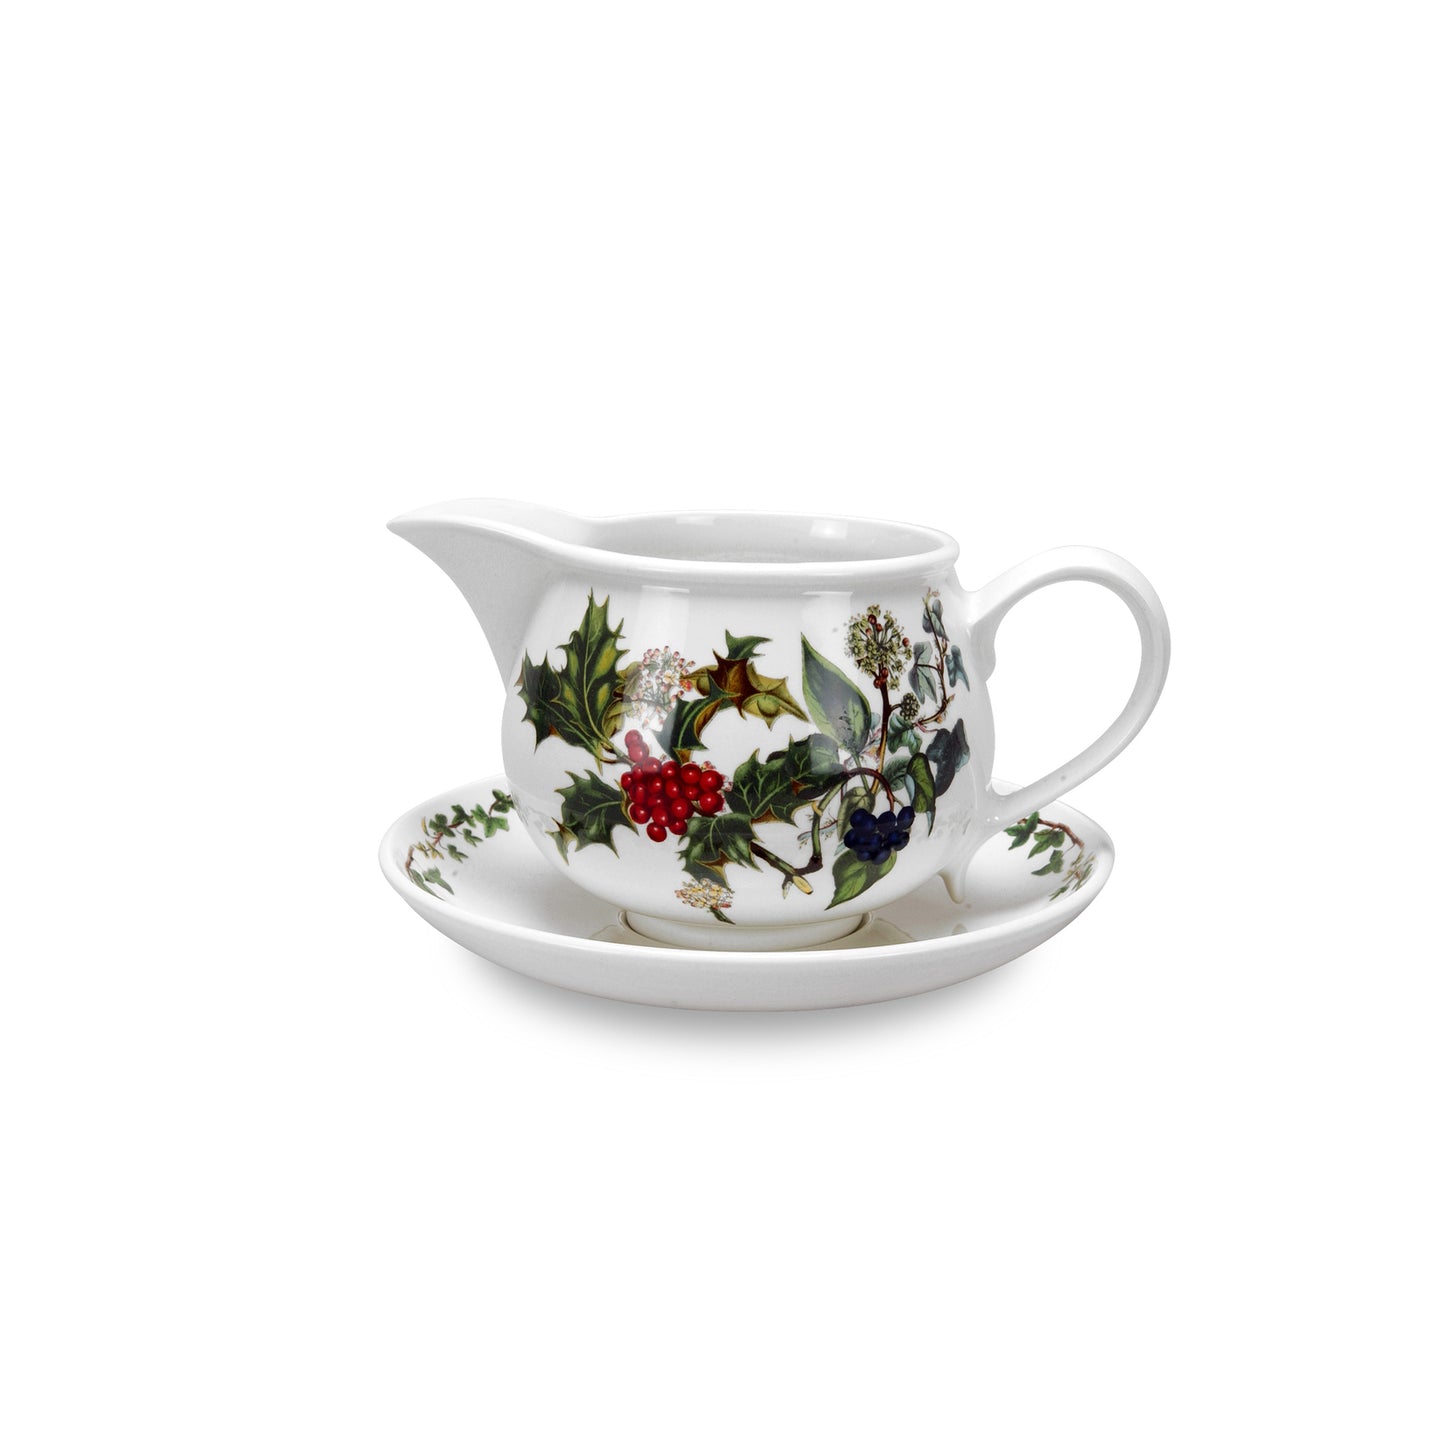 Portmeirion Holly and Ivy Gravy Boat and Stand